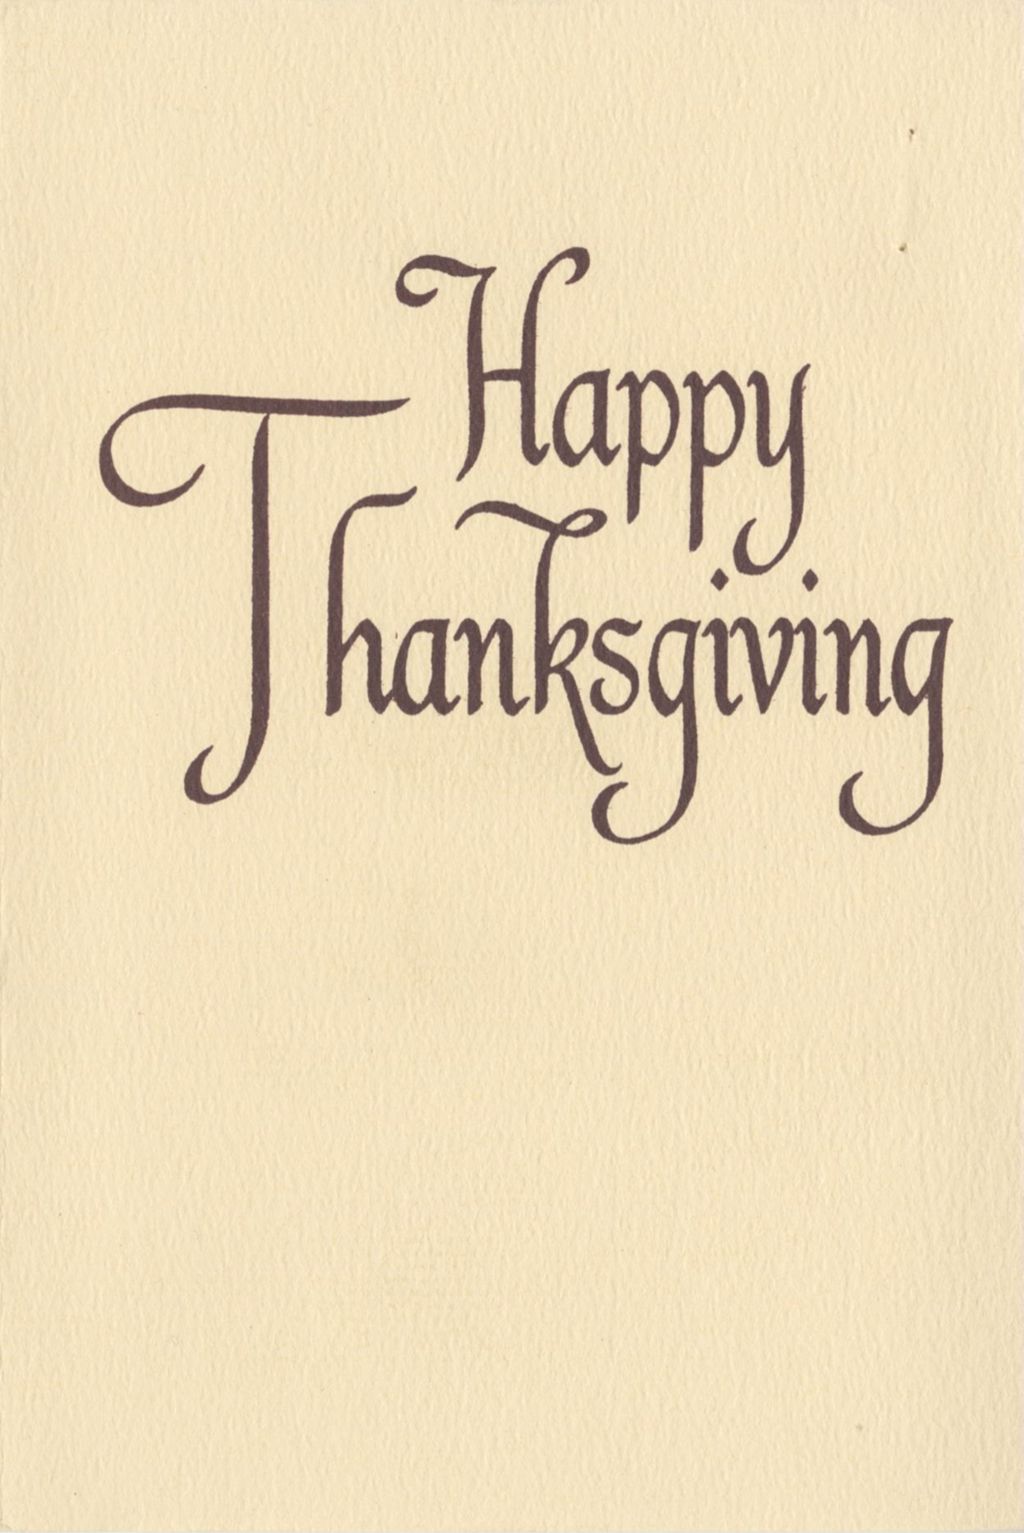 Thanksgiving card sent by the Burns family